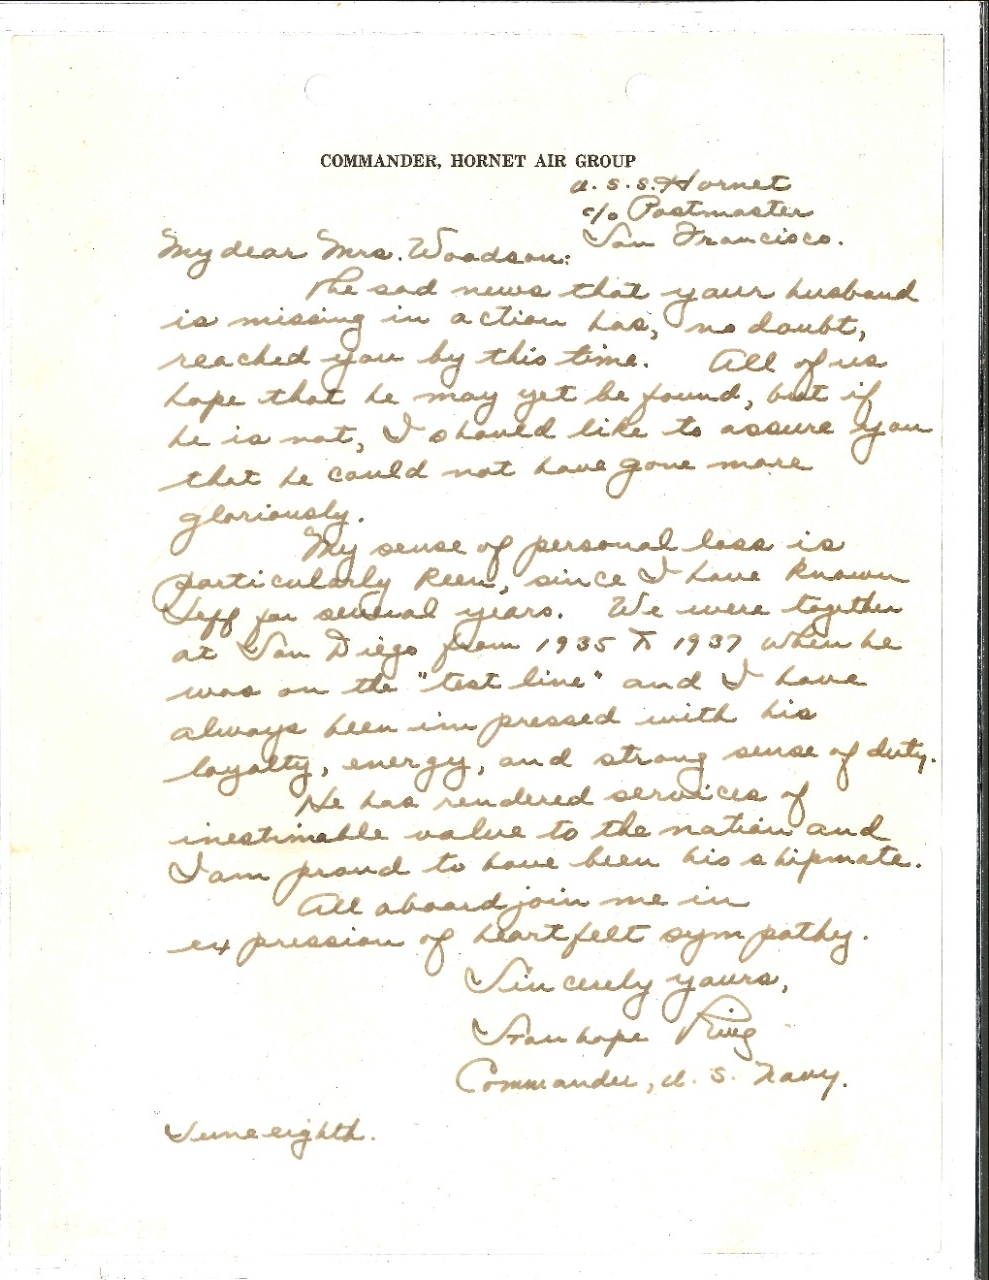 Handwritten letter to Mrs Woodson concerning her husband MIA